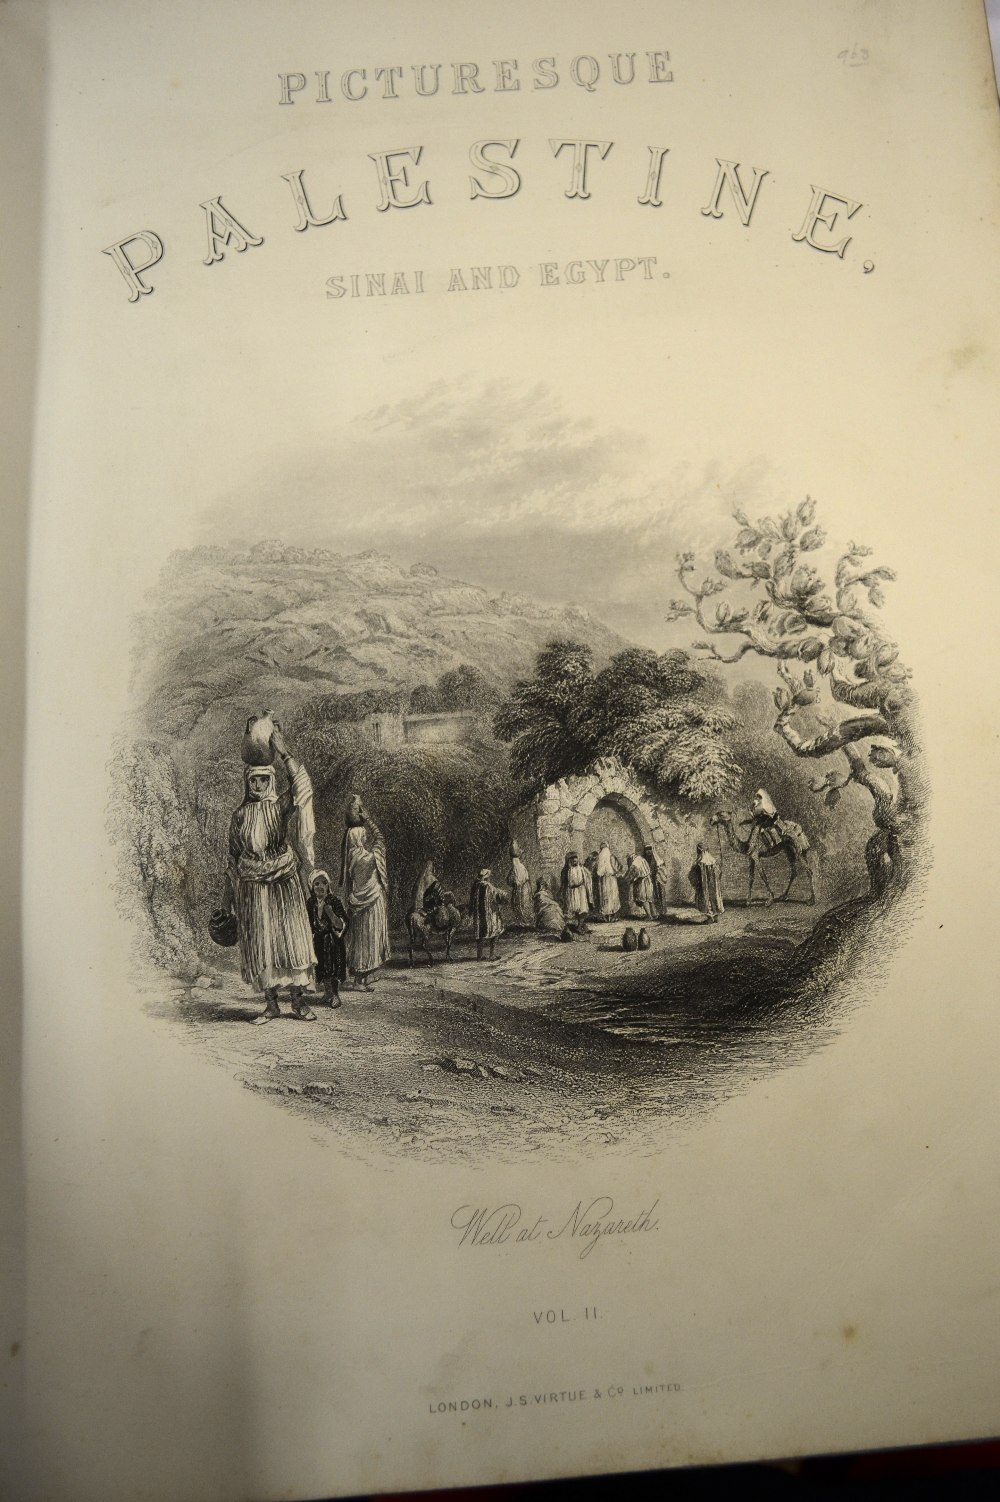 Wilson, Colonel, 'Picturesque Palestine', in four vols., with numerous steel engravings, Virtue & - Image 5 of 5